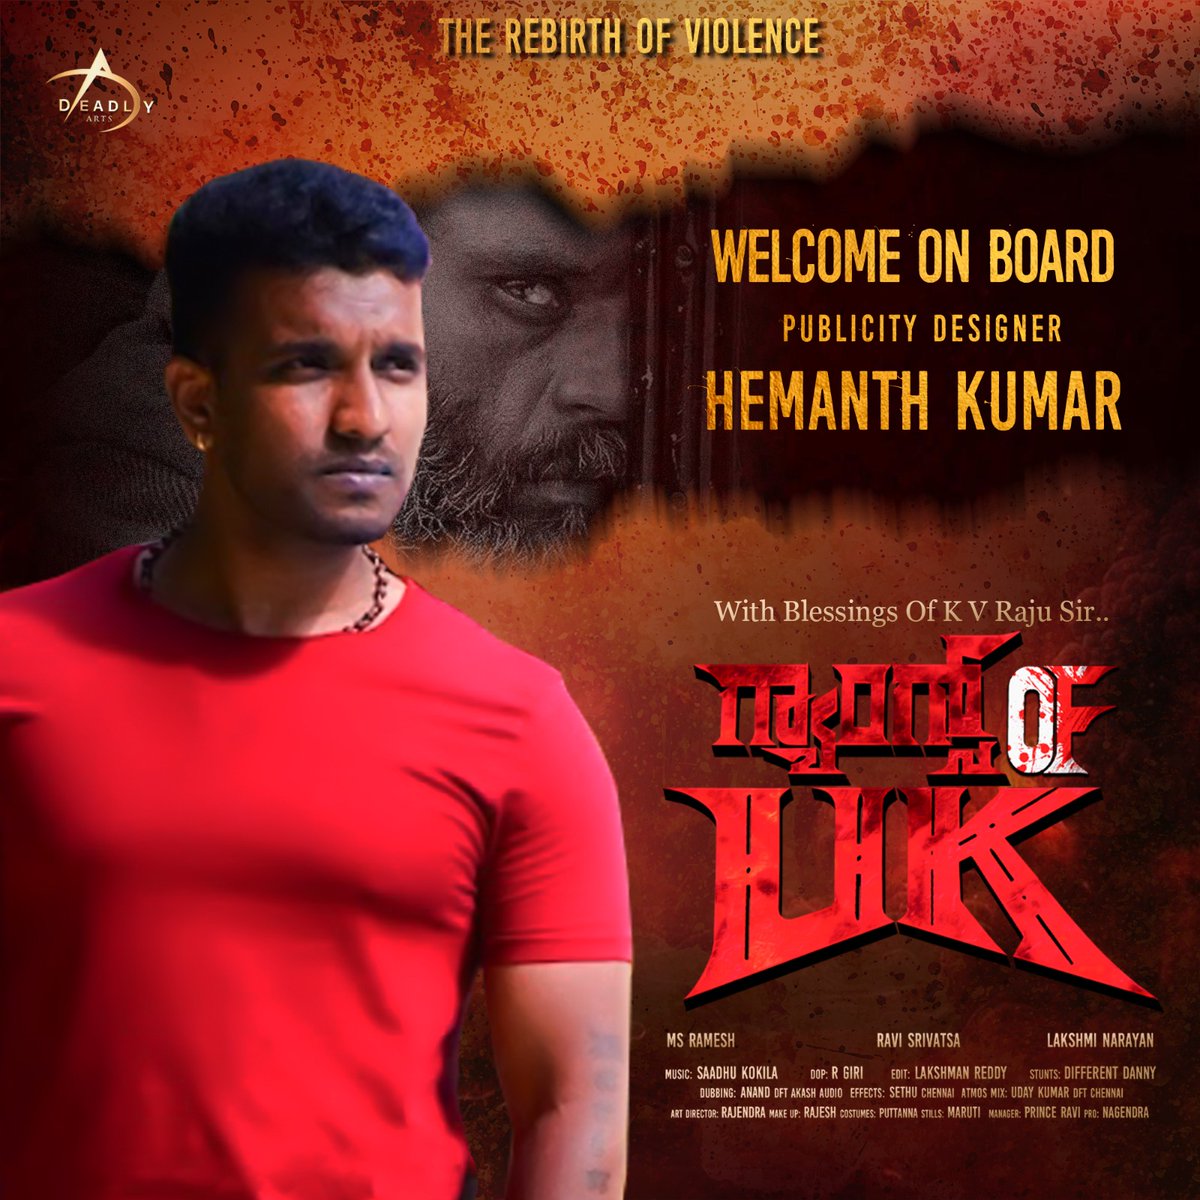 Welcome Hemanth Kumar! 🌟 Thrilled to have you on board as our Publicity Designer. Get ready to make waves with your creative genius! 📸✨

#gangsofuk #deadlyarts #welcomeonboard #hkdesigns #kfi #kannadamovie